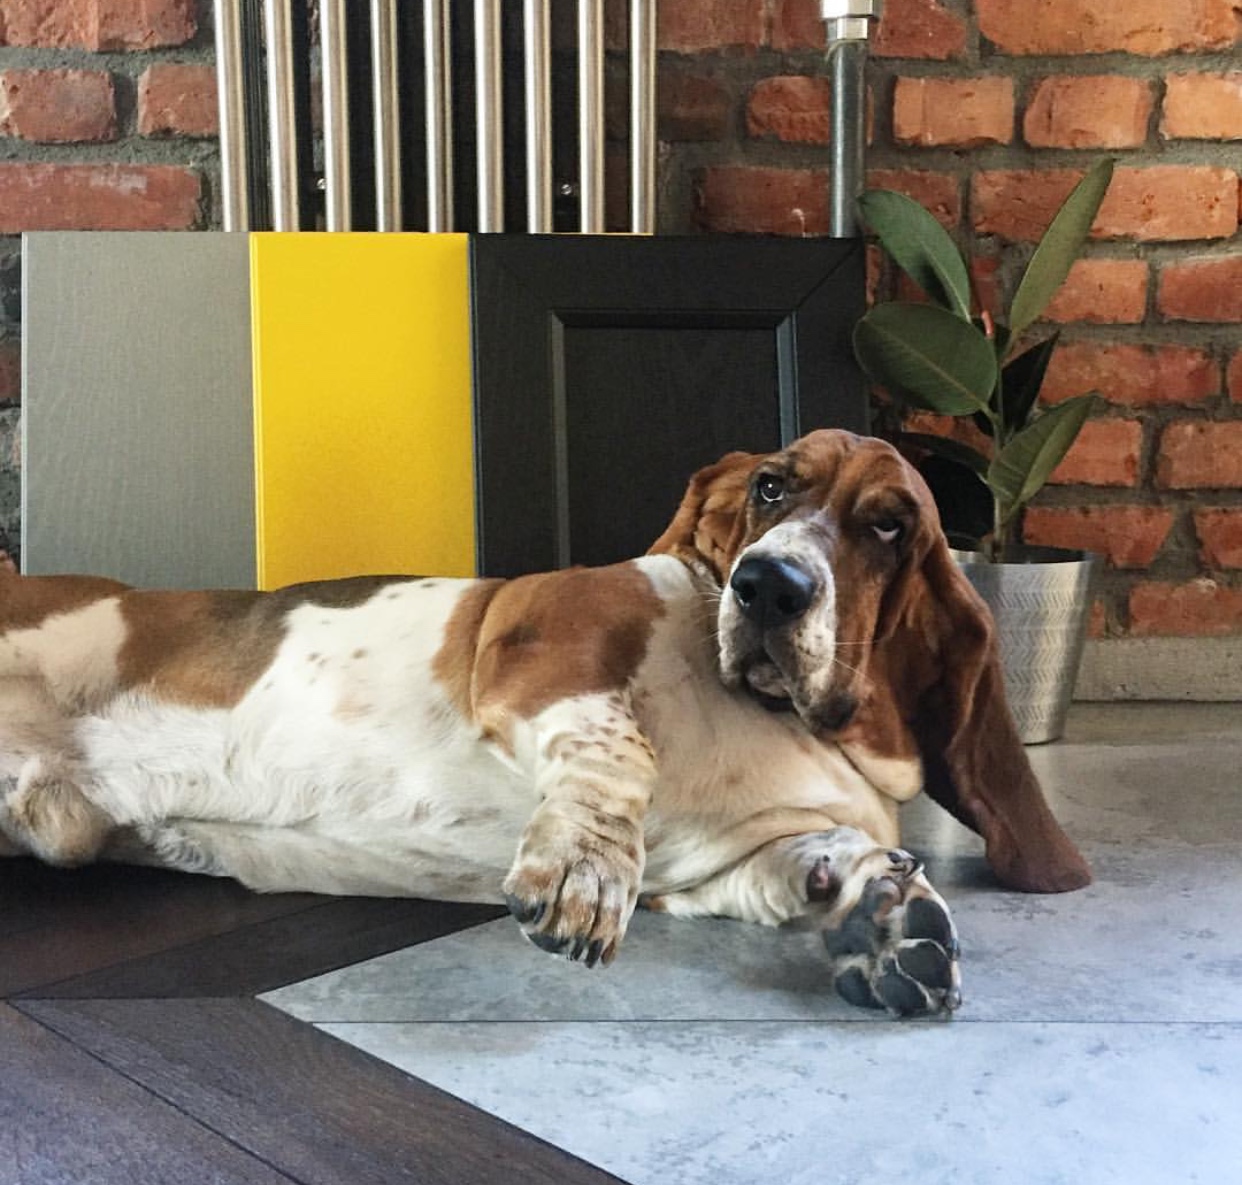 A Basset Hound lying on the floor with its confused